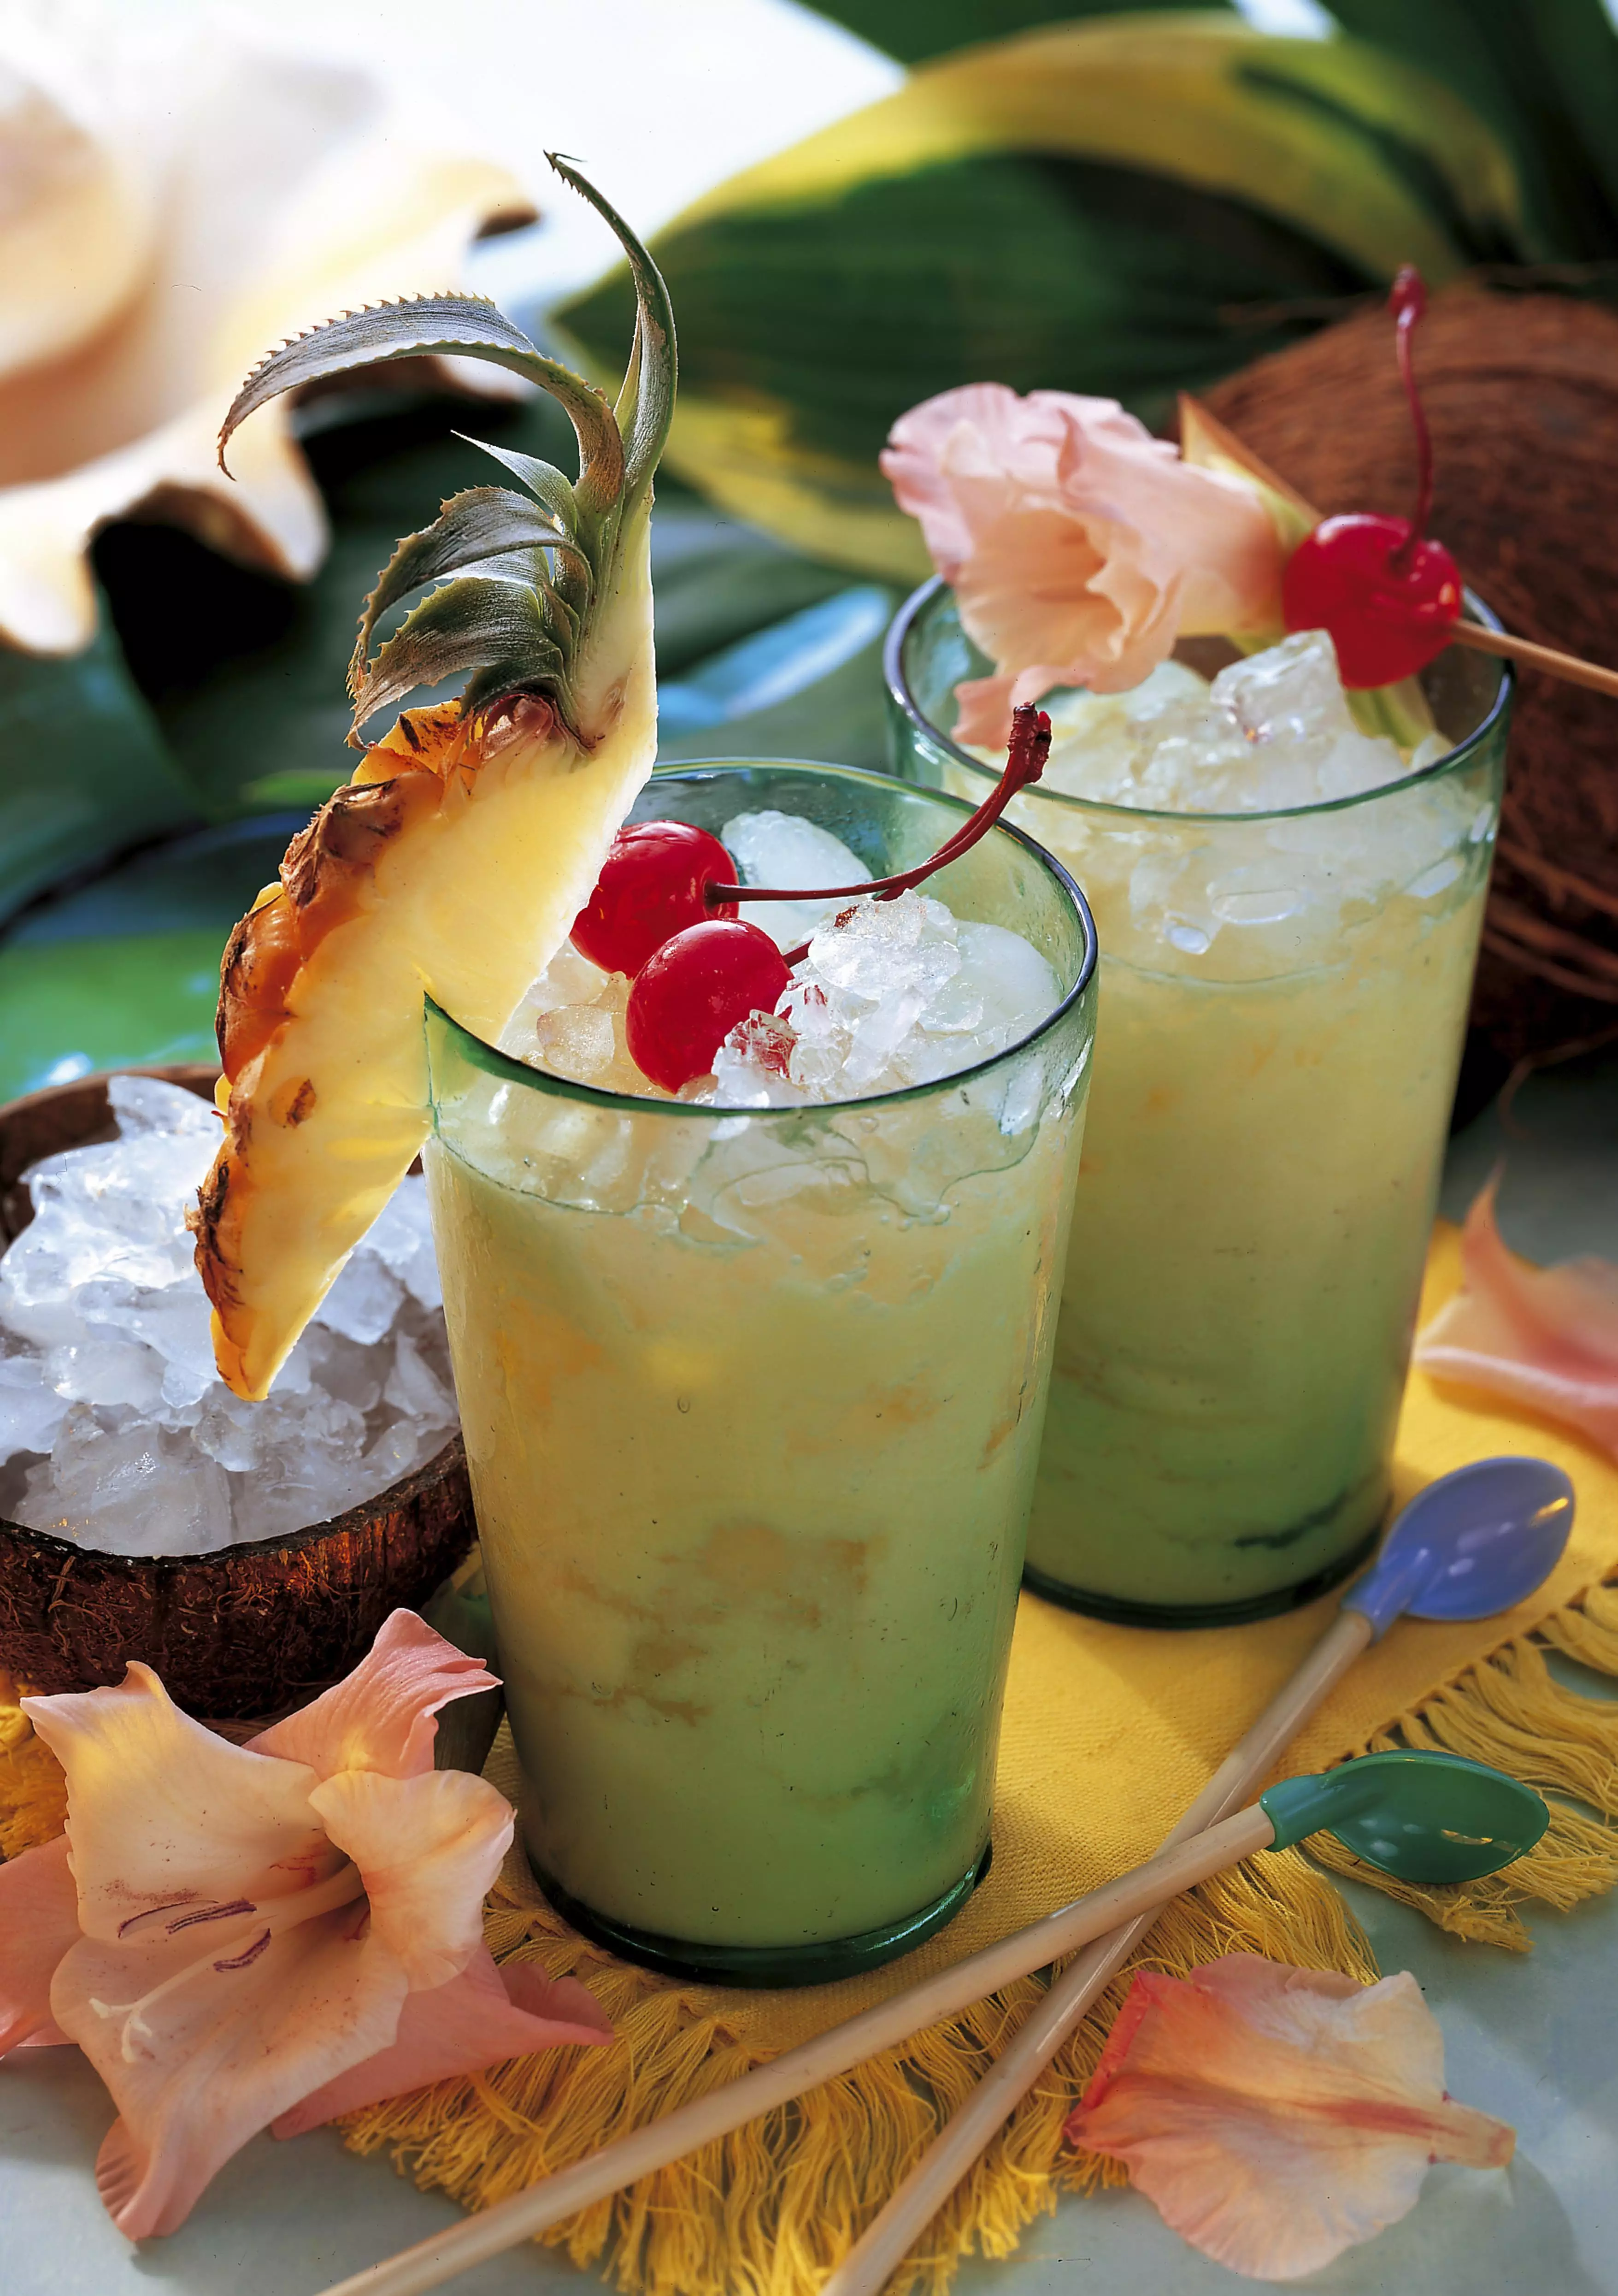 The Piña Colada is one of the most popular and well-known cocktails (